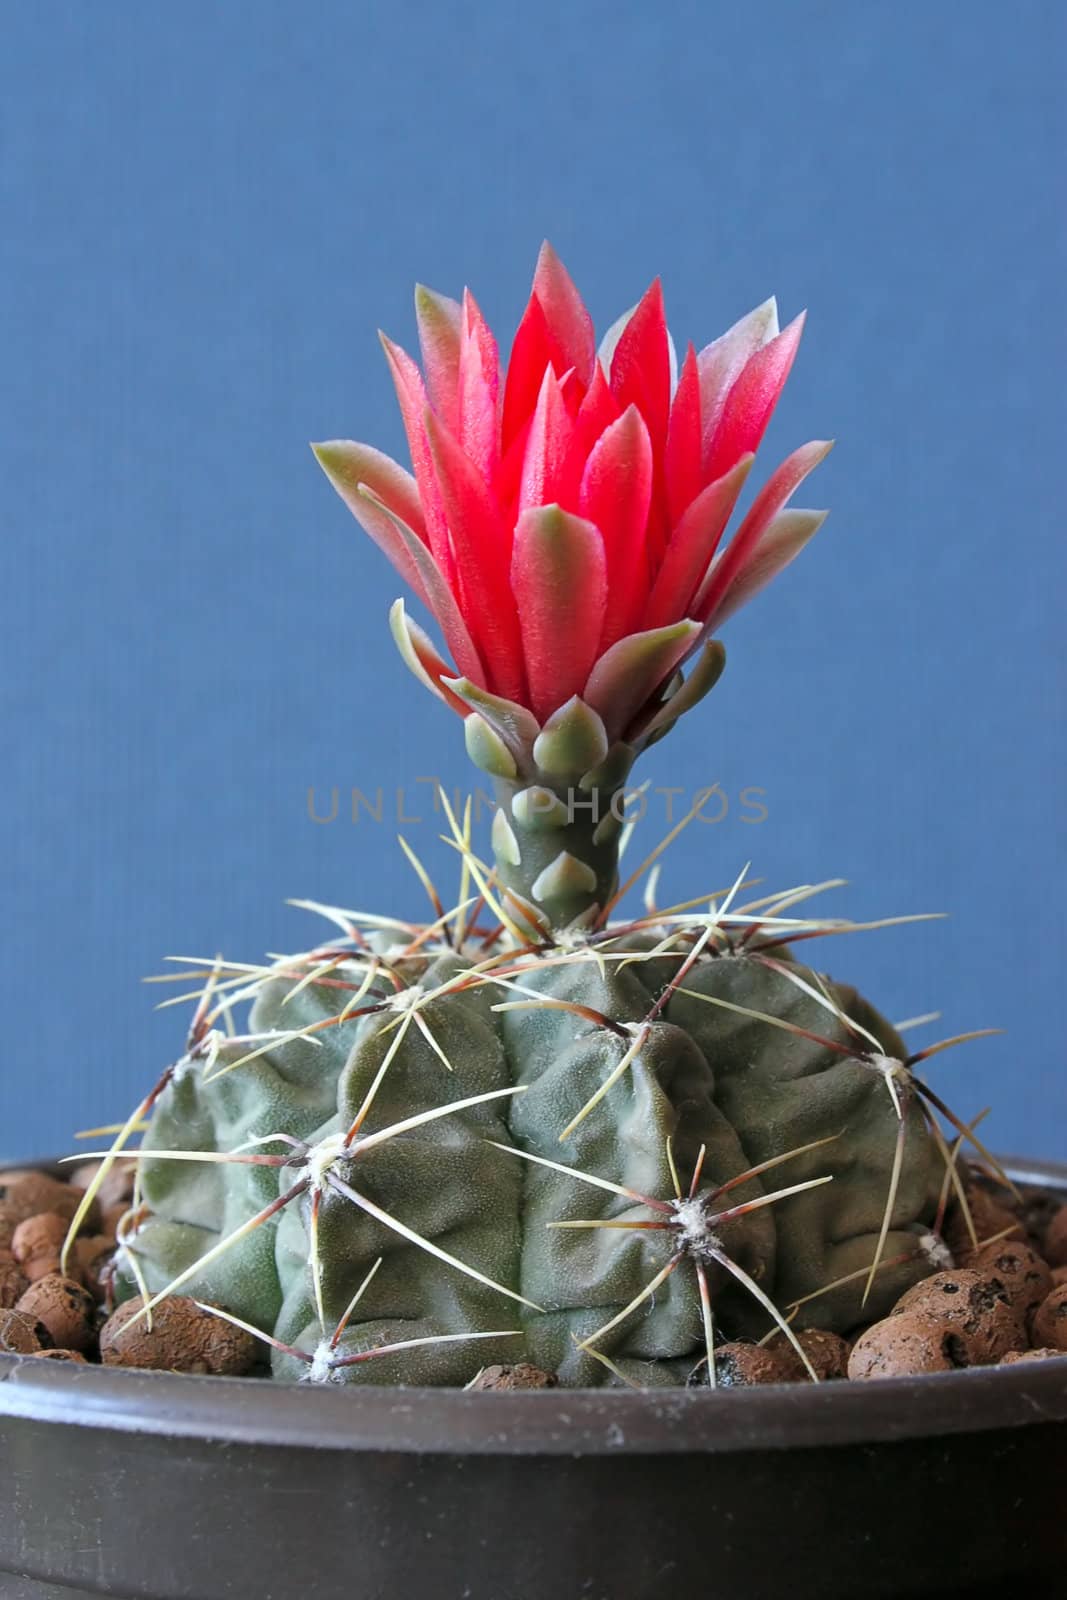 Cactus with blossoms on dark background (Gymnocalicium).Image with shallow depth of field.